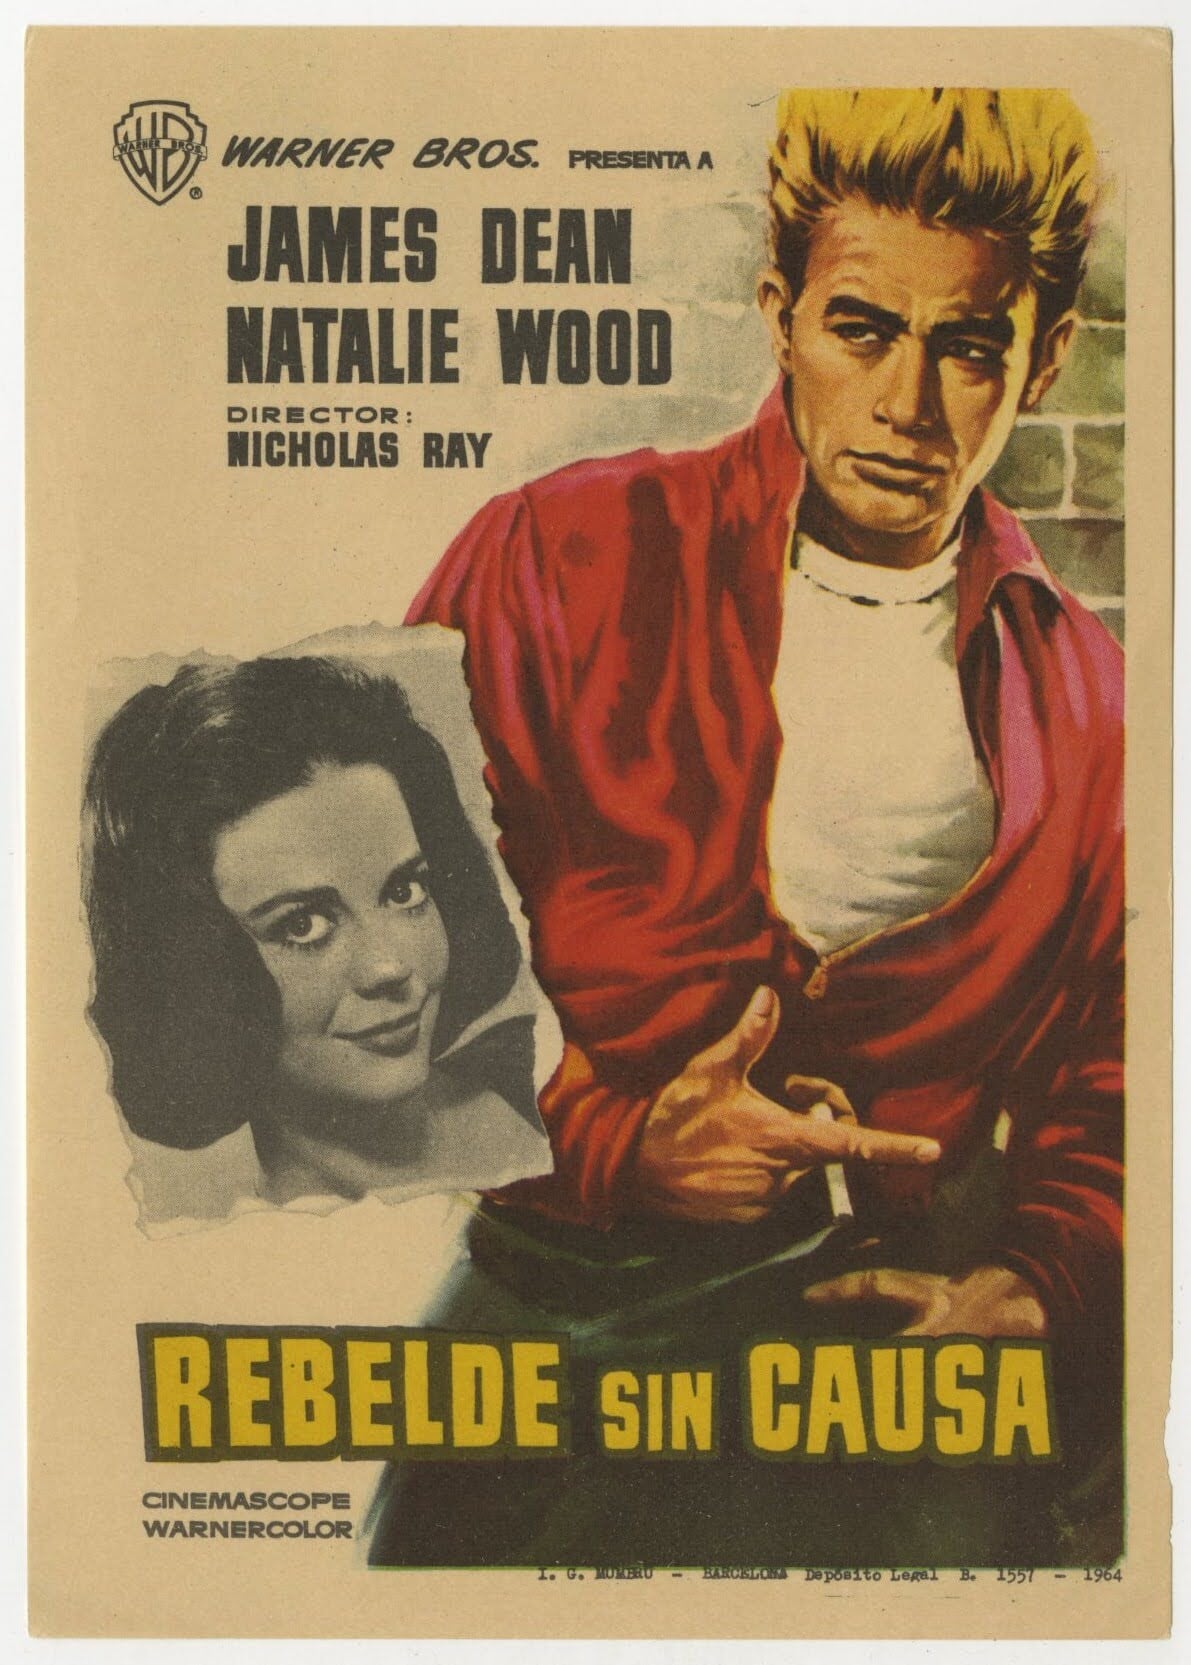 Rebel Without a Cause Spanish Herald (R 1964) - posterpalace.com